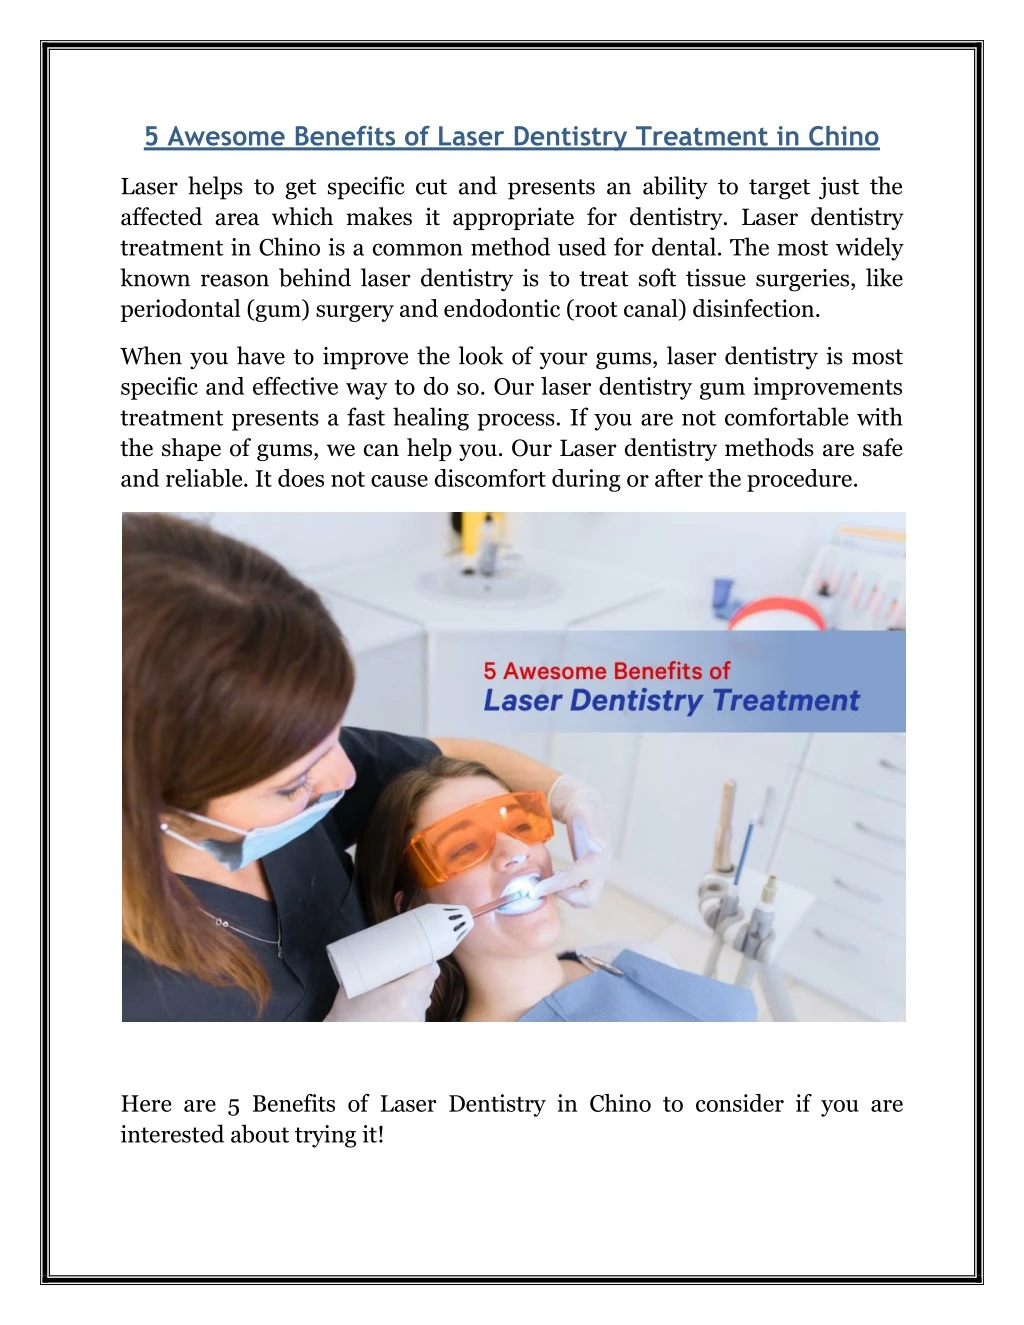 5 awesome benefits of laser dentistry treatment